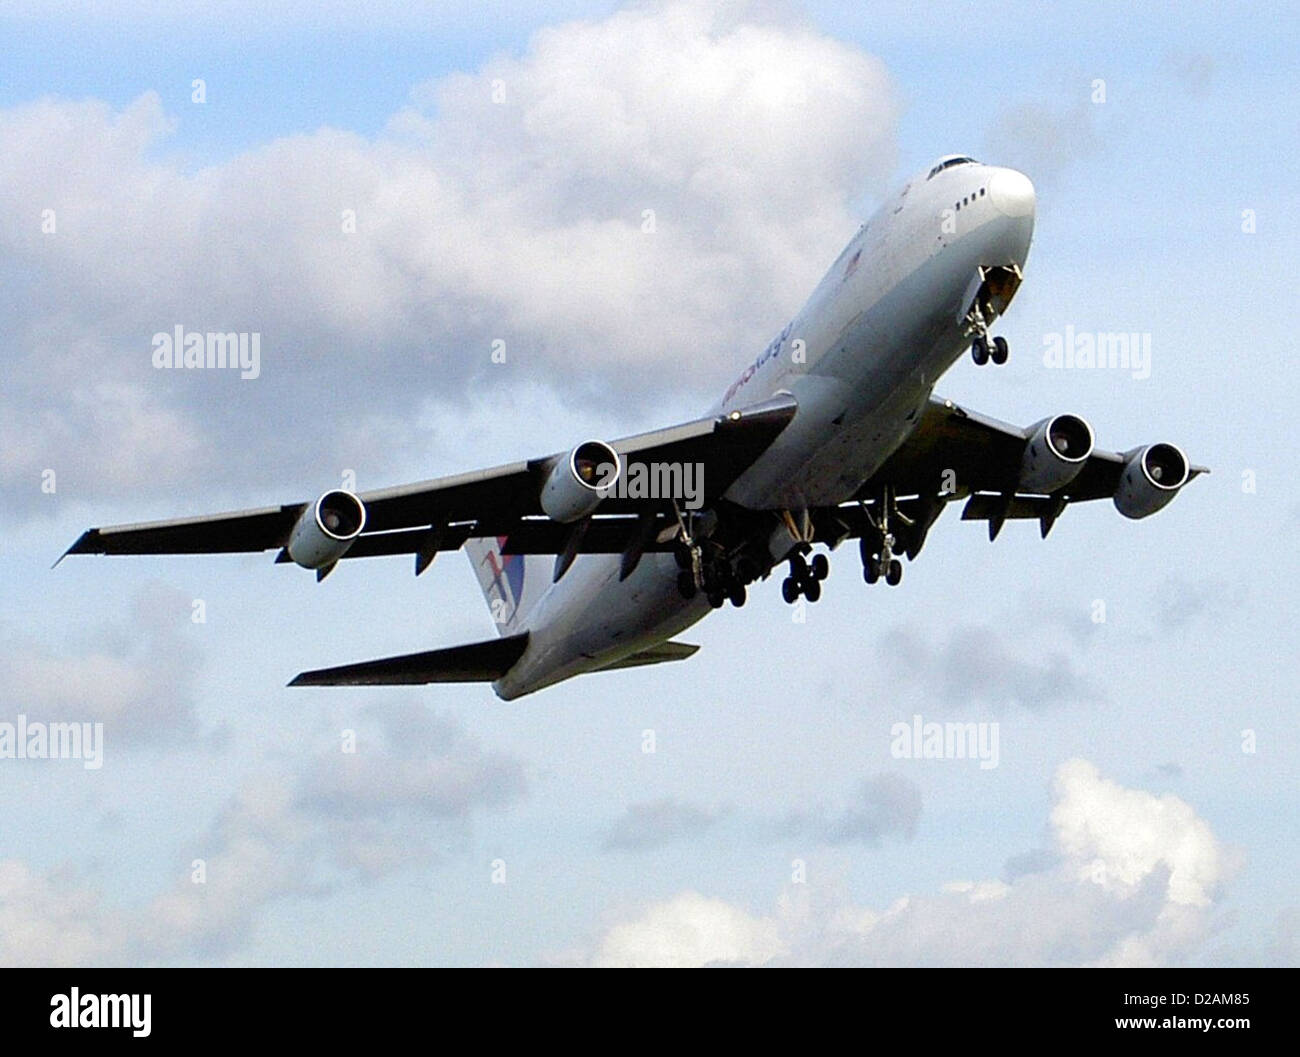 Boeing 747-2F6B TF-ARN Banque D'Images